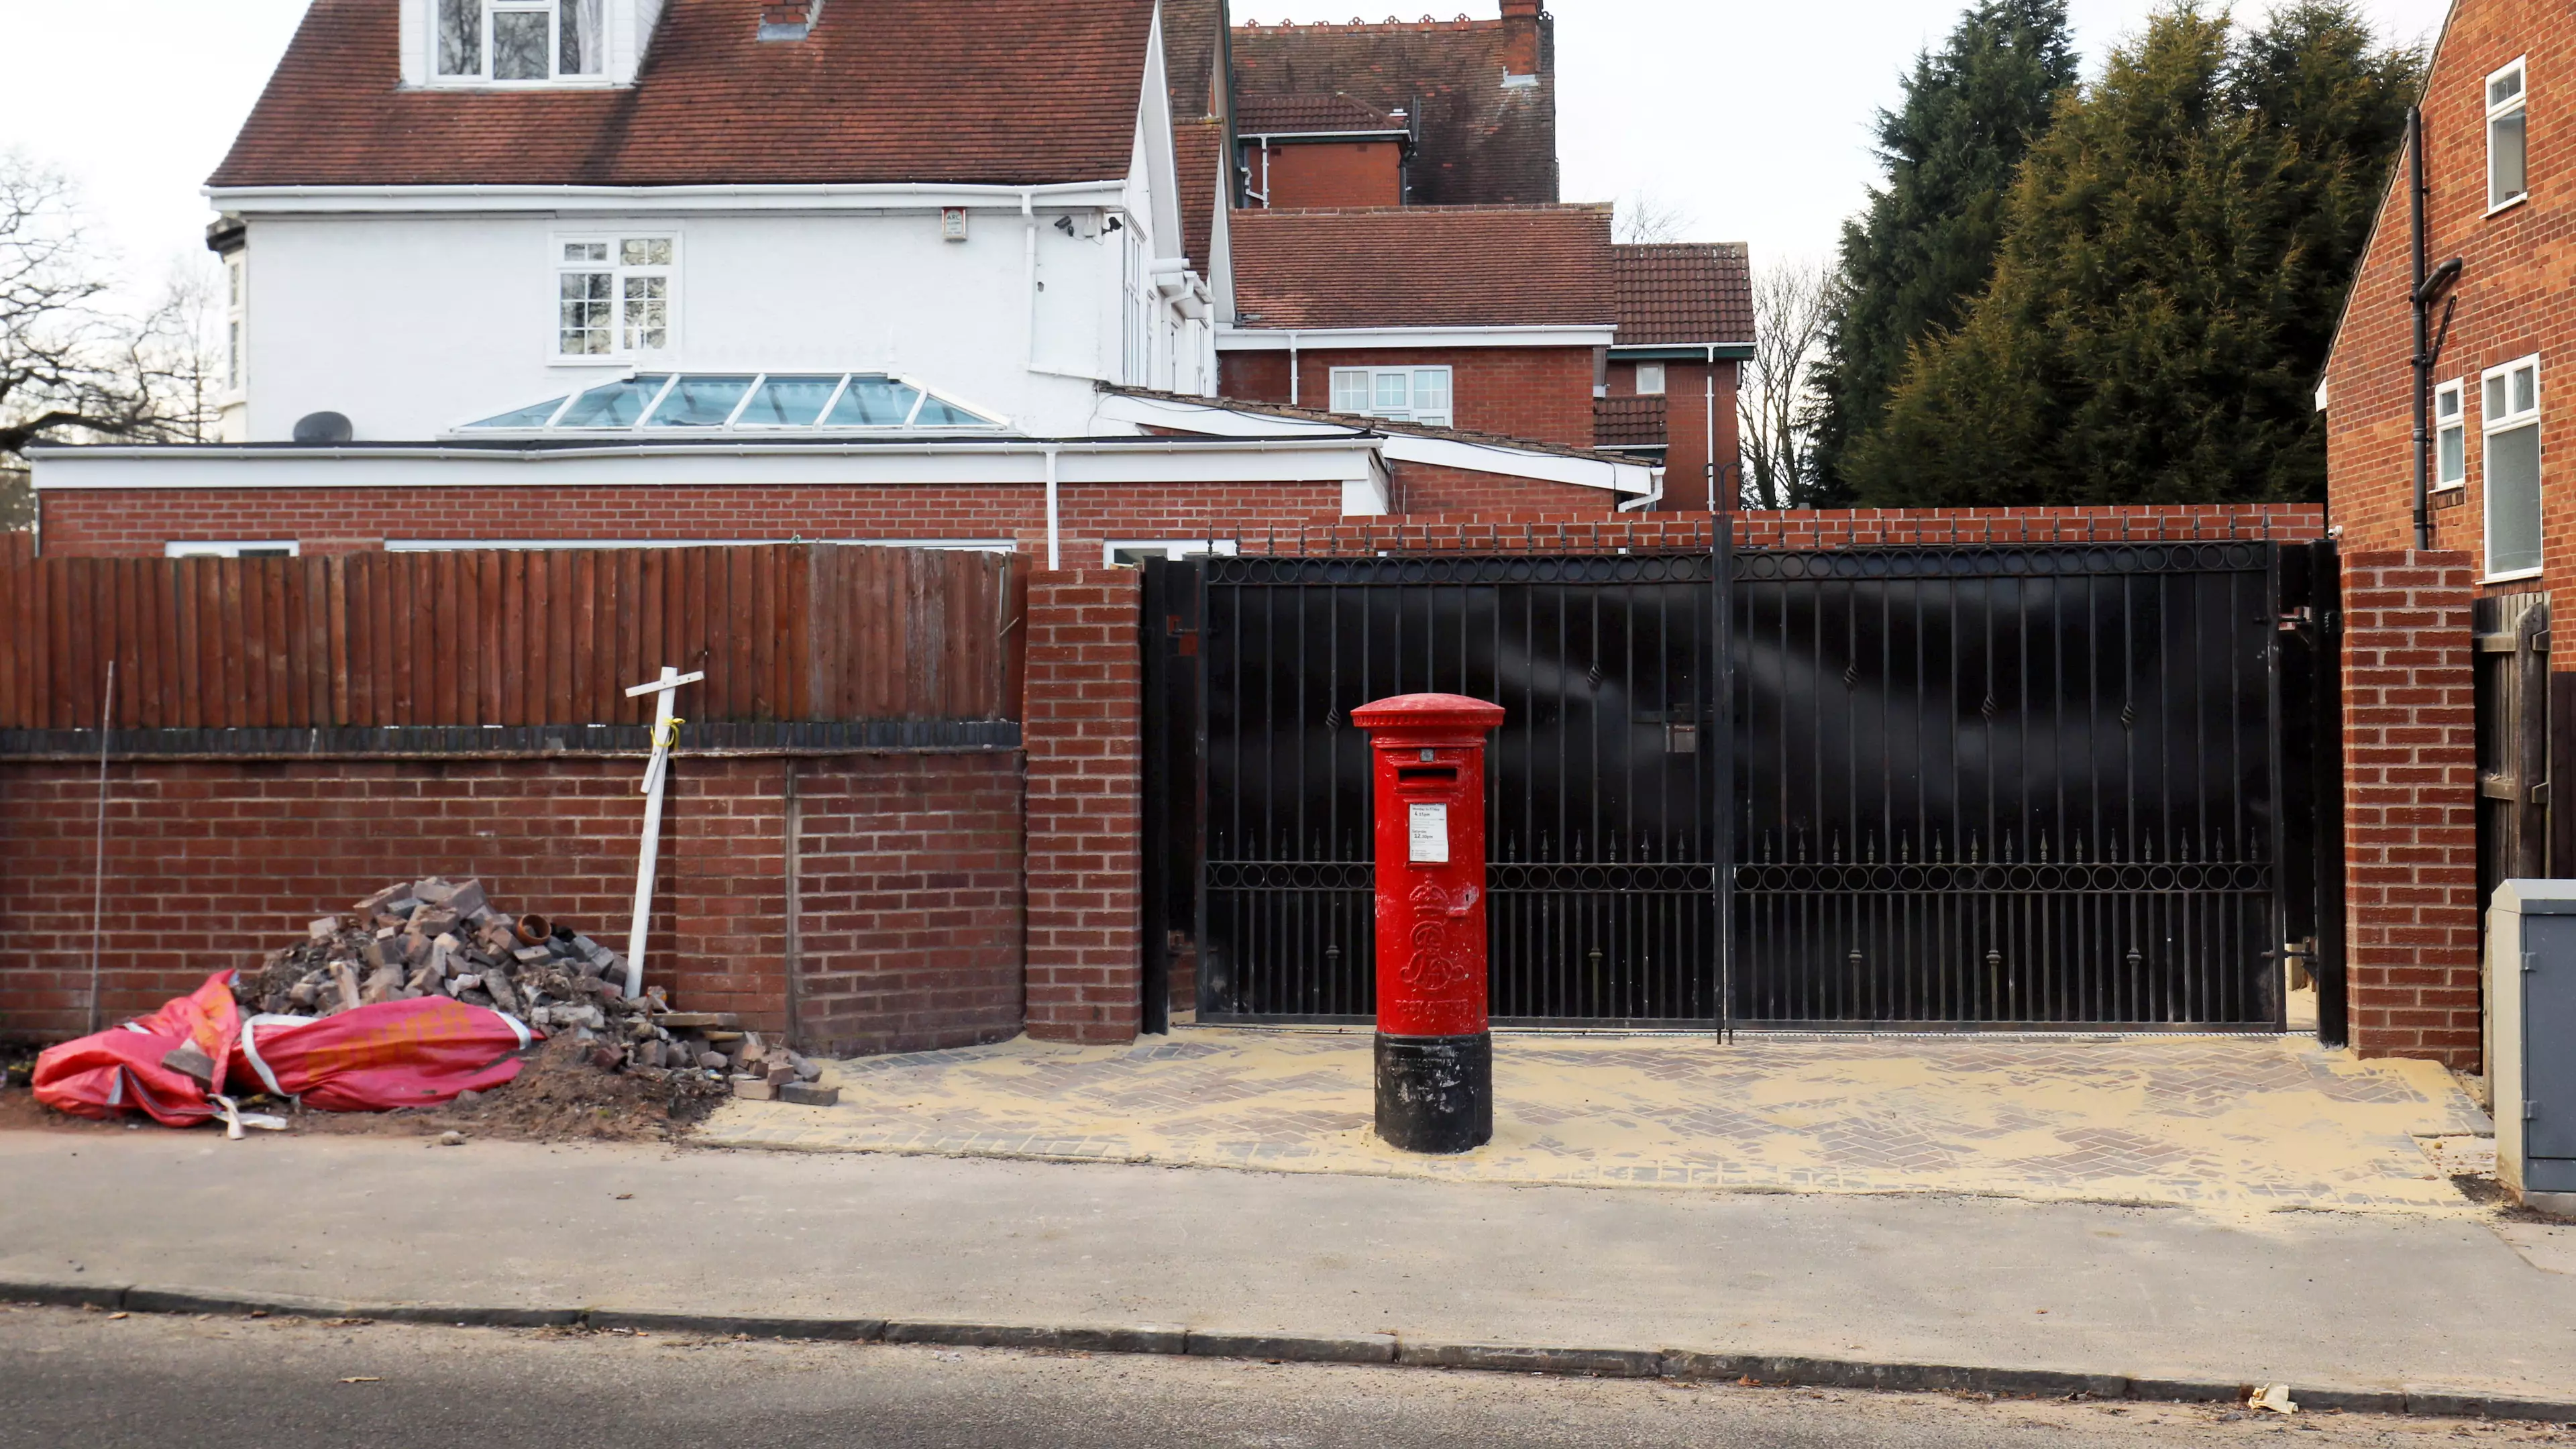 Homeowner Asks For 100-Year-Old Postbox To Be Moved After Widening Driveway